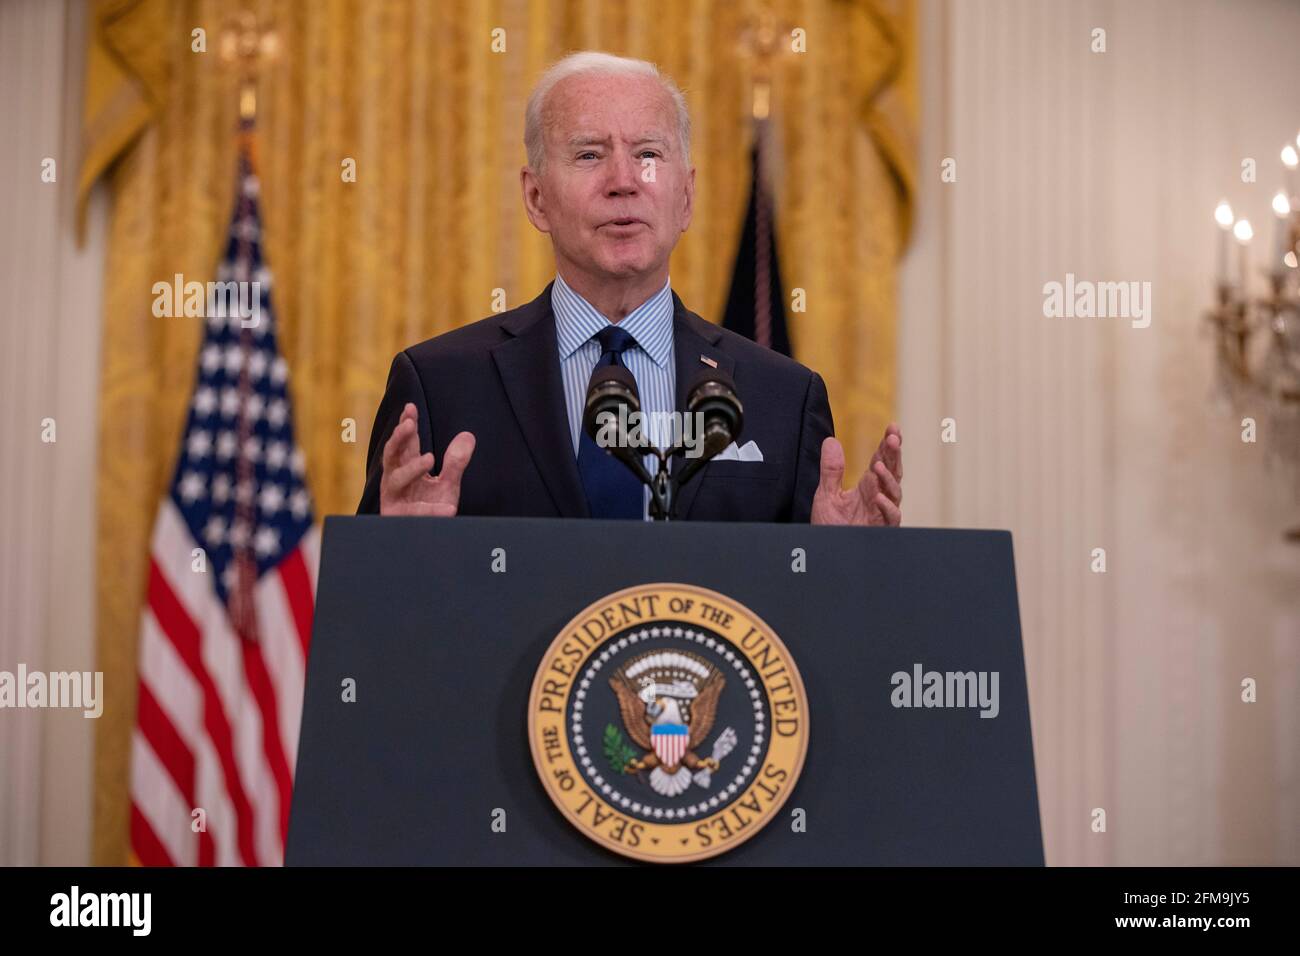 Washington, United States. 07th May, 2021. President Joe Biden speaks about the April jobs report in the East Room of the White House in Washington, DC on Friday, May 18, 2021. The U.S. economy brought back far fewer jobs than estimated in April and the unemployment rate unexpectedly increased. Photo by Tasos Katopodis/Pool/Sipa USA Credit: Sipa USA/Alamy Live News Stock Photo